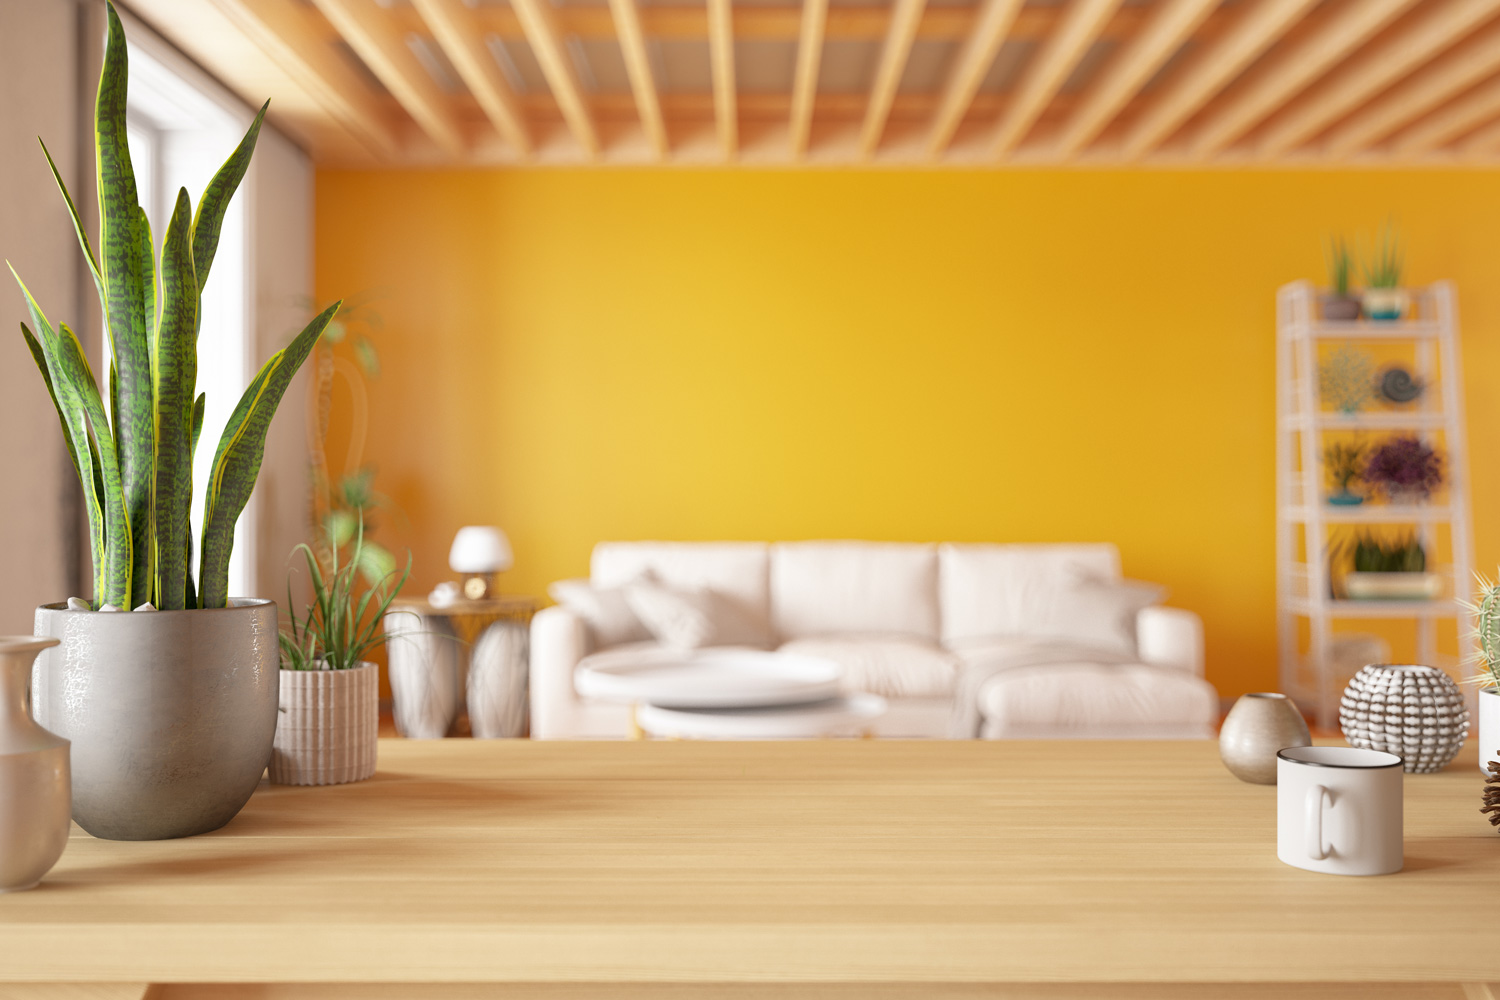 Wooden Table Top with Blur of Cozy Living Room.